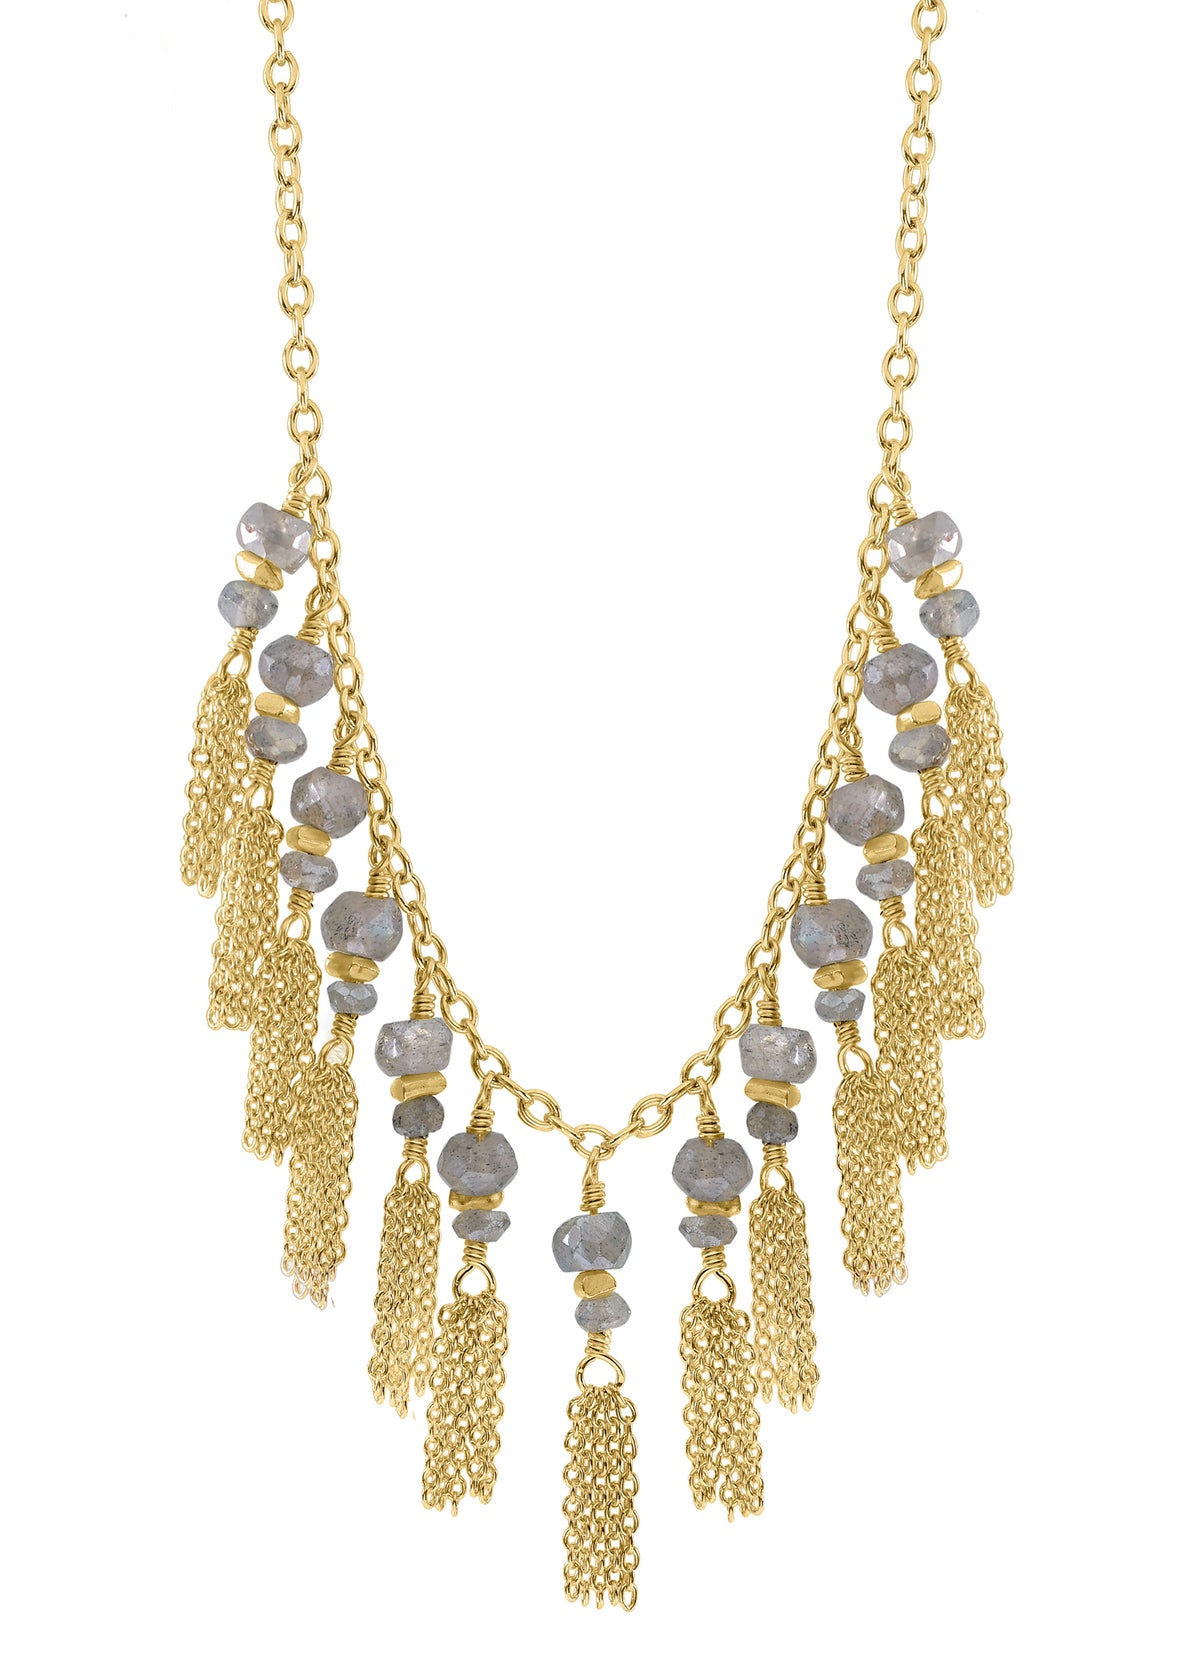 Labradorite 14k gold fill 14k gold vermeil sterling silver beads Necklace measures 17&quot; in length Tassels measure 3/4&quot; in length and 3/16&quot; in width (x13) Handmade in our Los Angeles studio